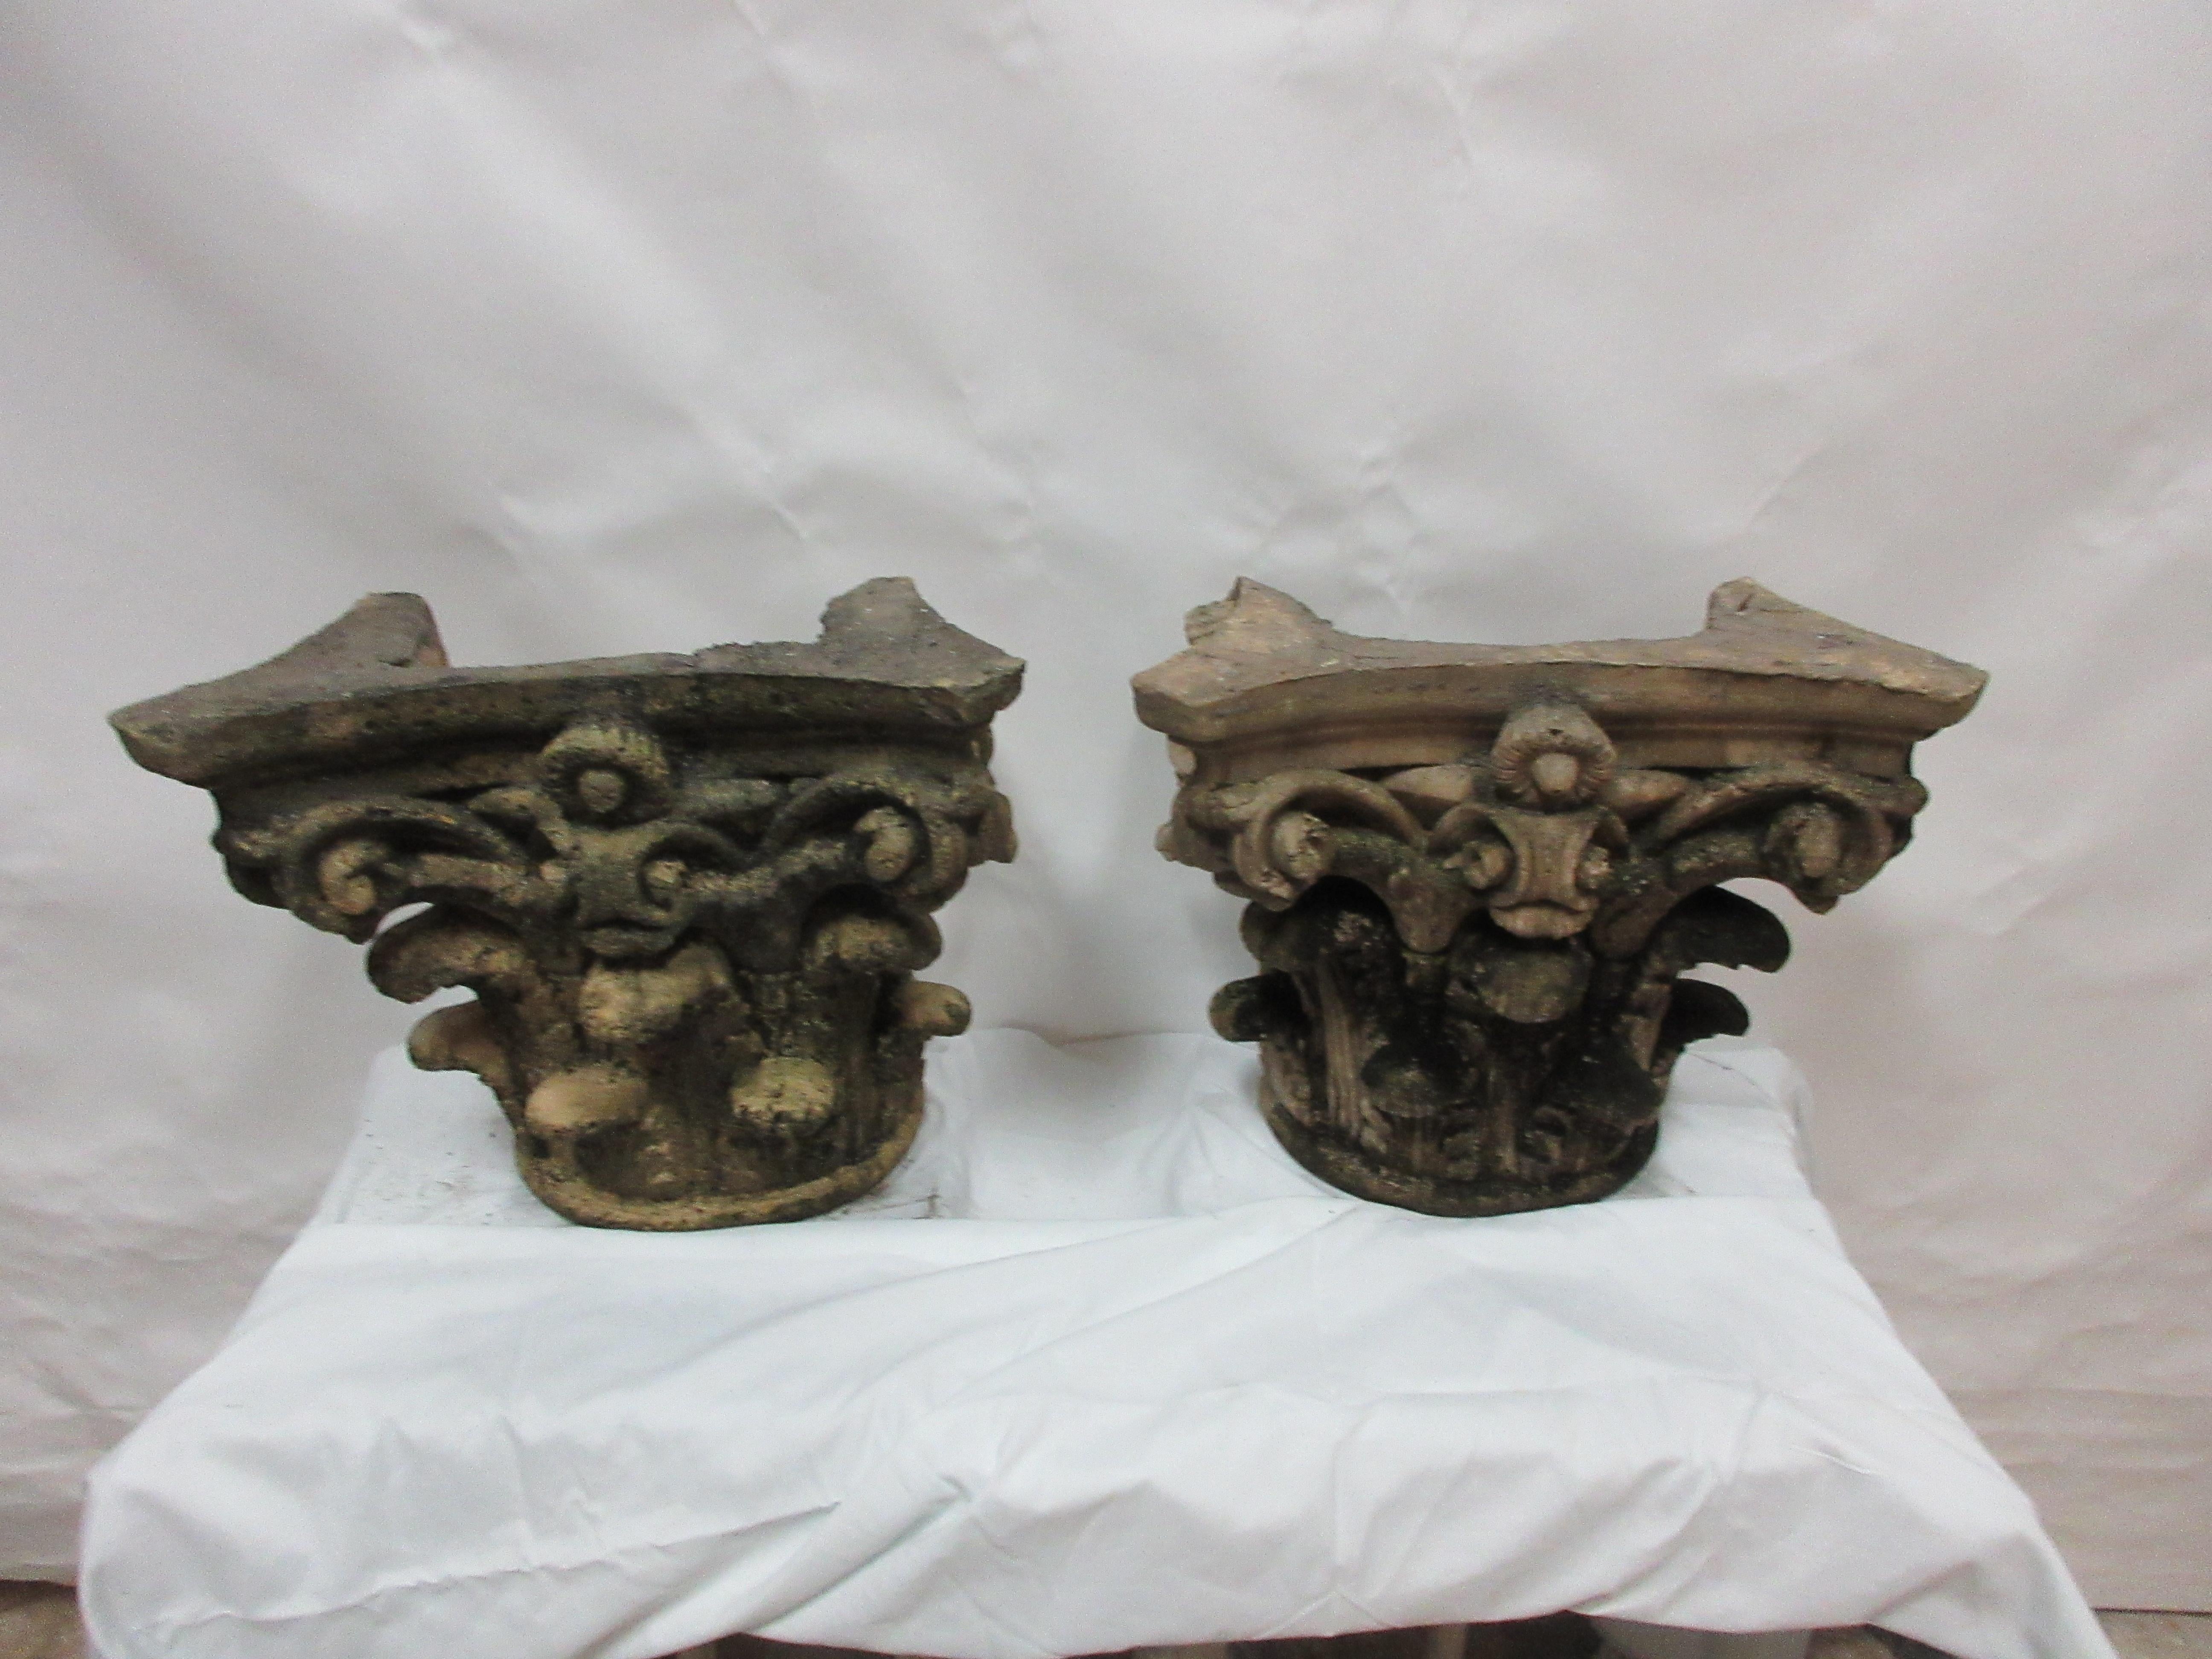 This is a set of 2 half Corbel tops, great for a garden display or coffee table bottoms.